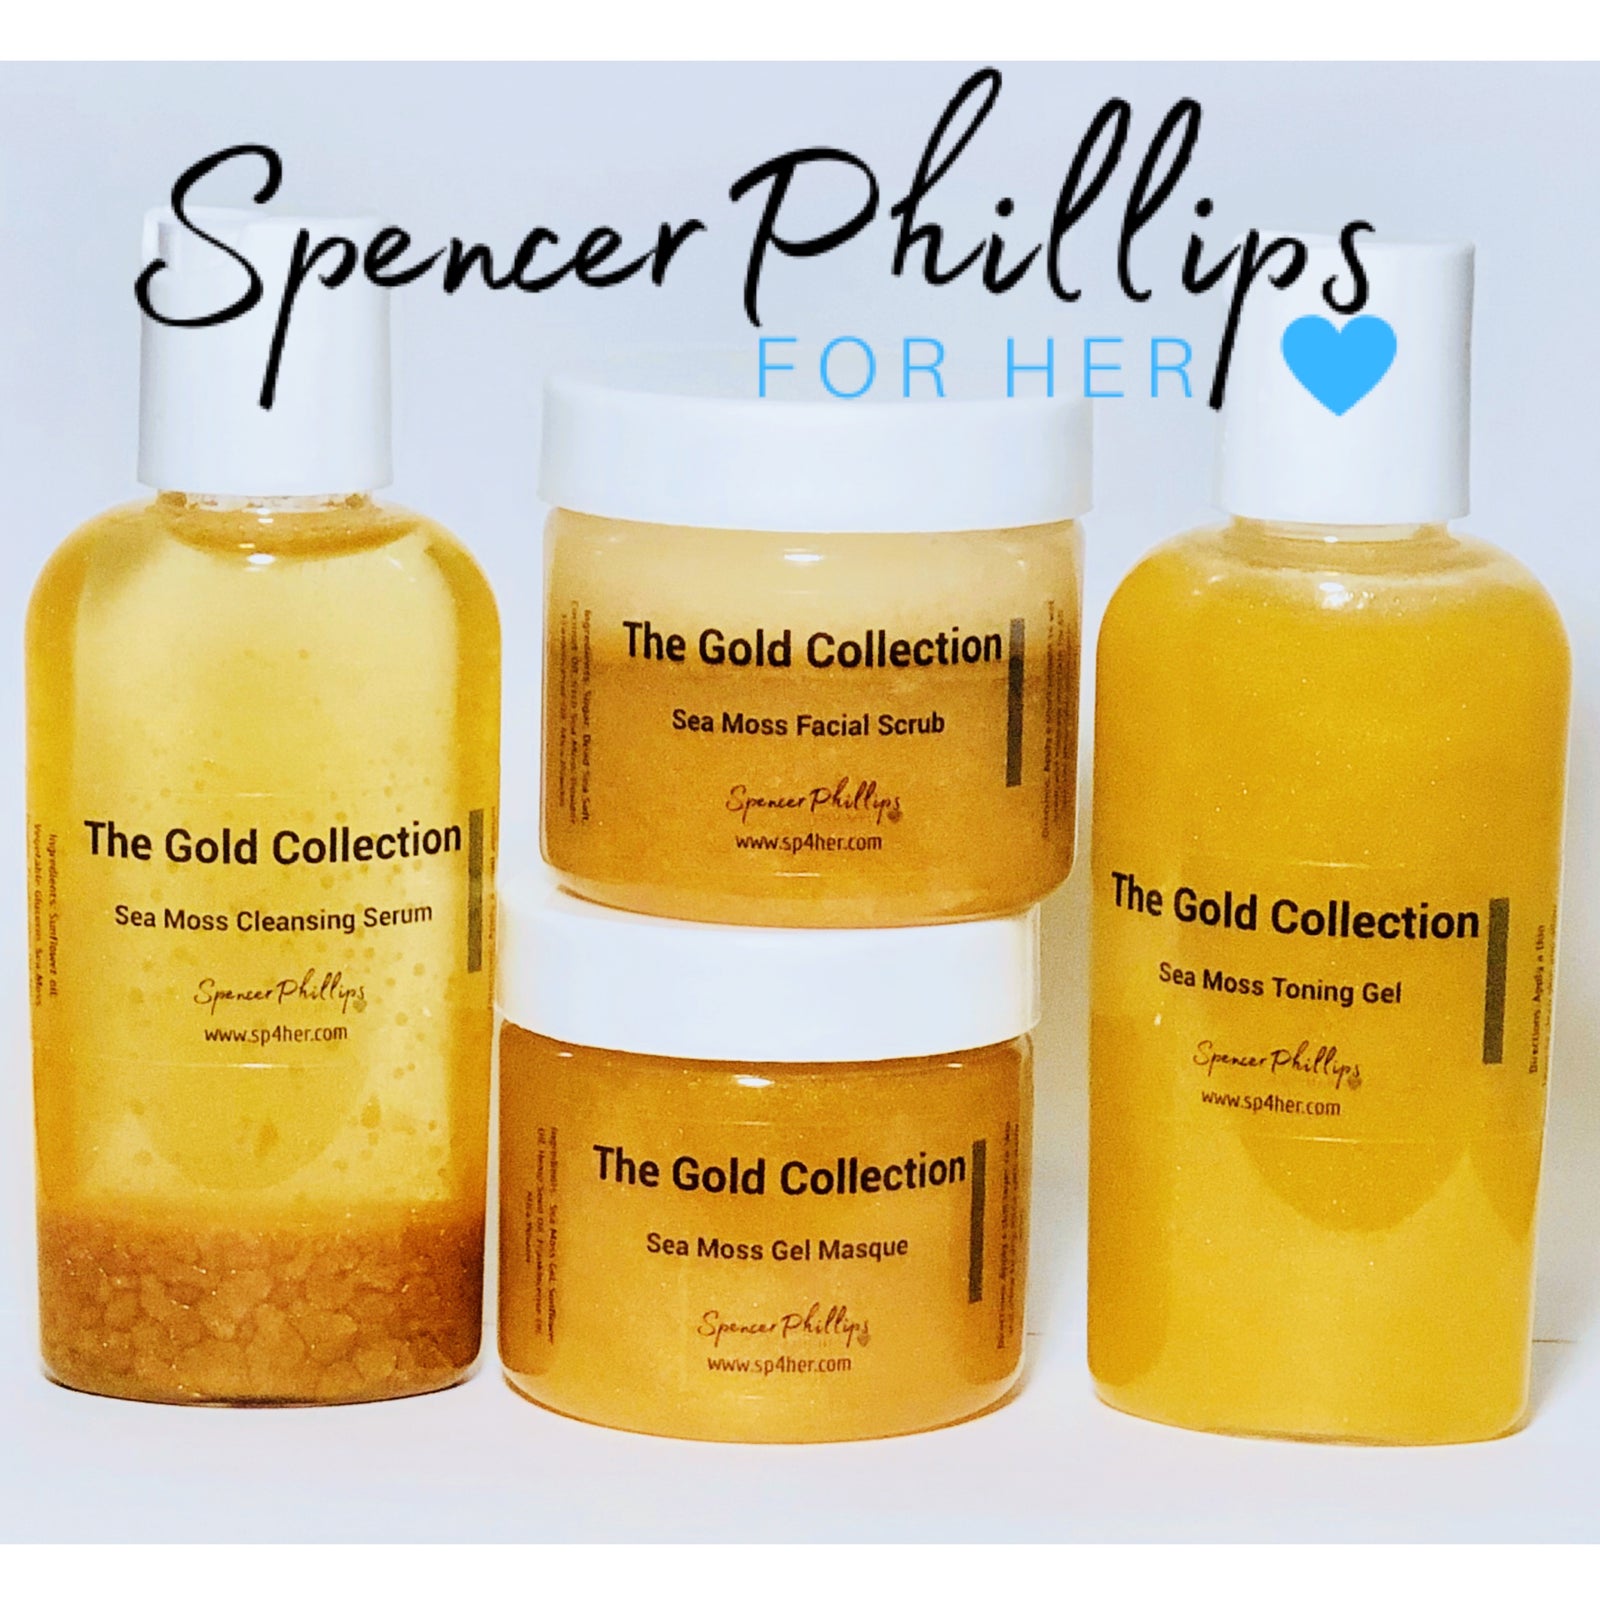 The Golden Sea Moss Collection